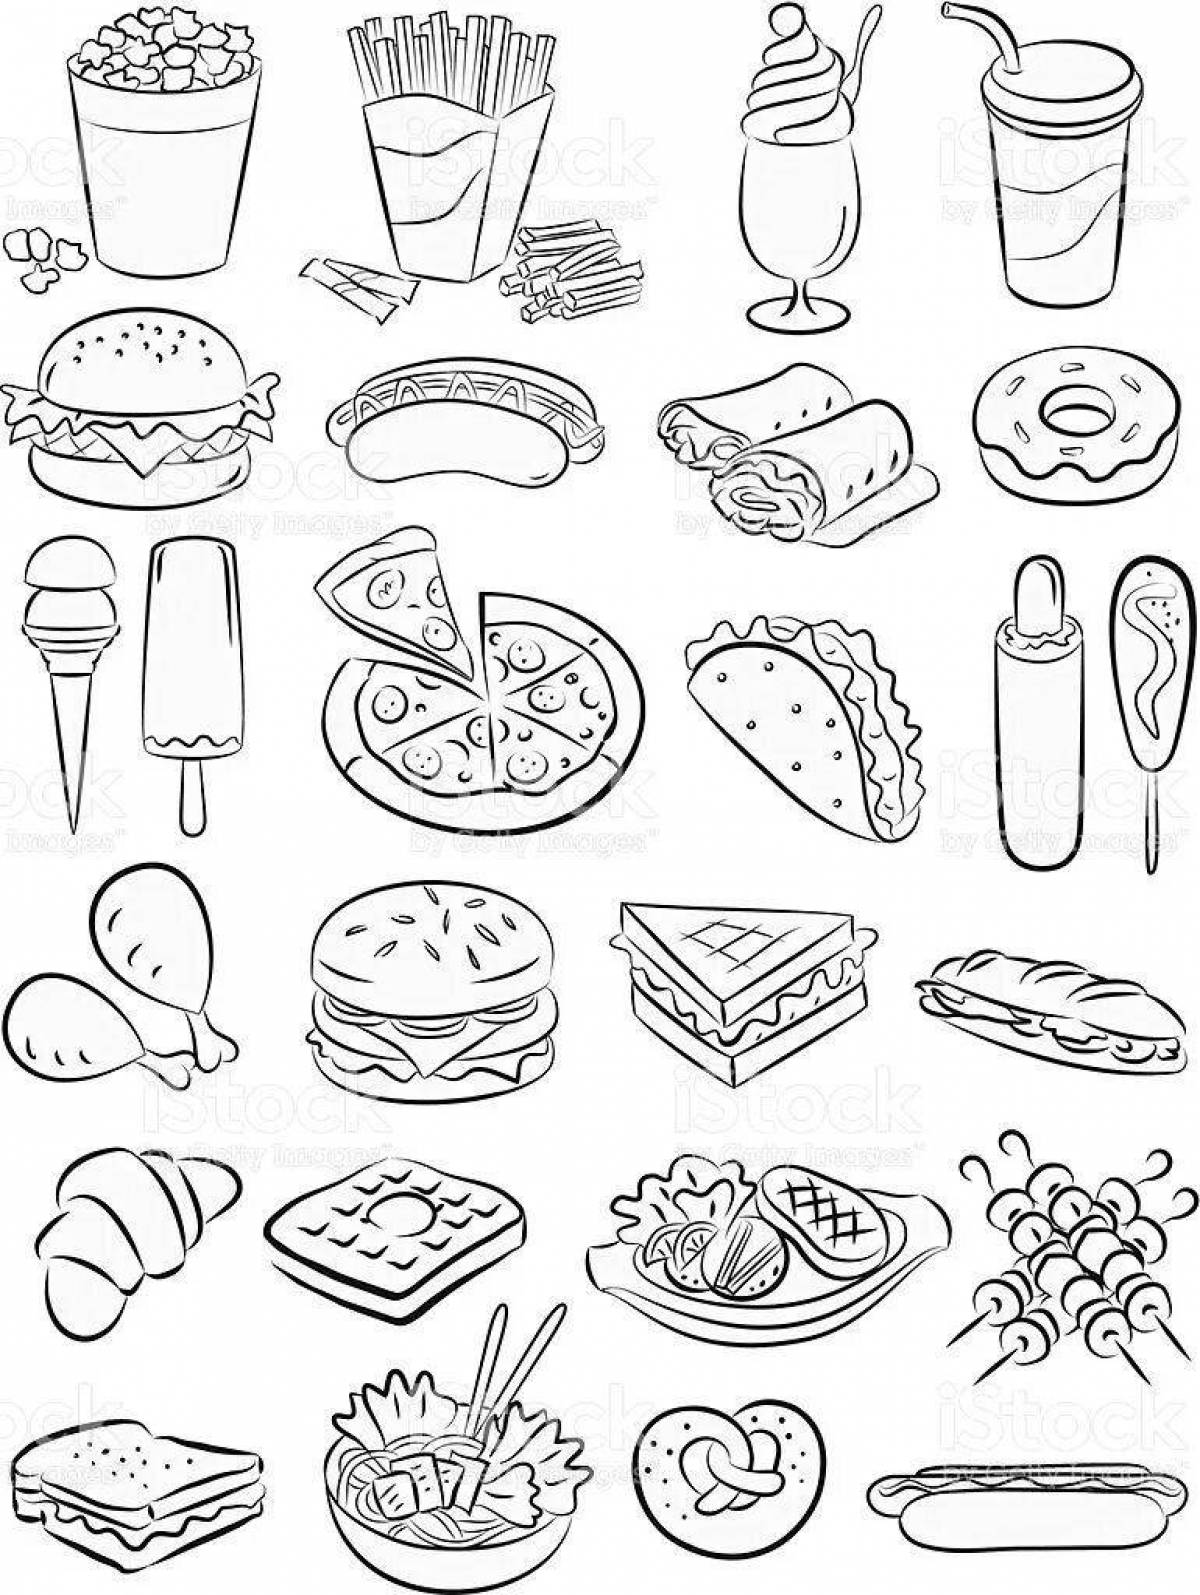 Coloring page of healthy aesthetic food